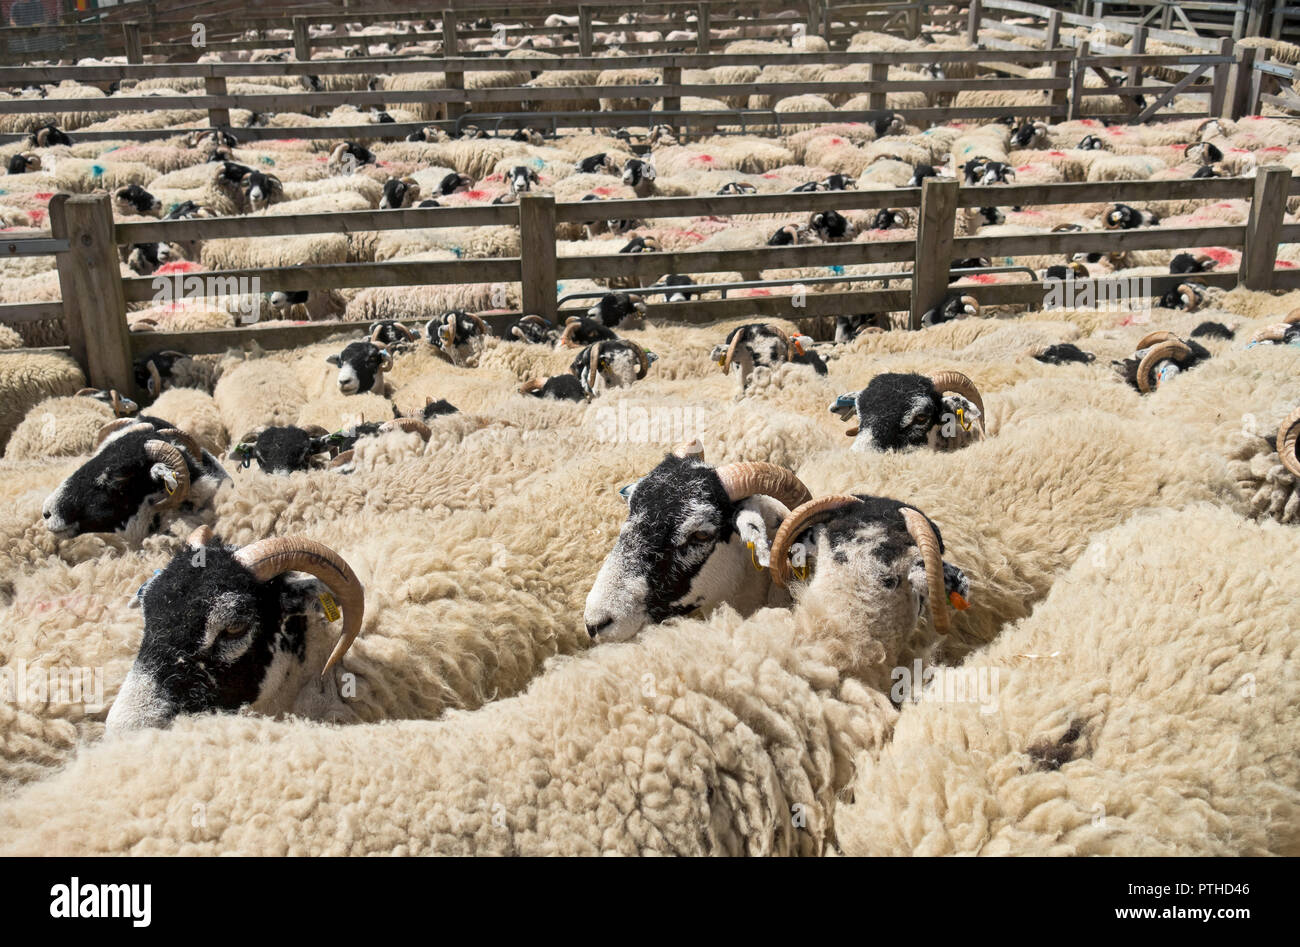 Swaledale sheep awaiting shearing at the Great Yorkshire Show in summer Harrogate North Yorkshire England UK United Kingdom GB Great Britain Stock Photo